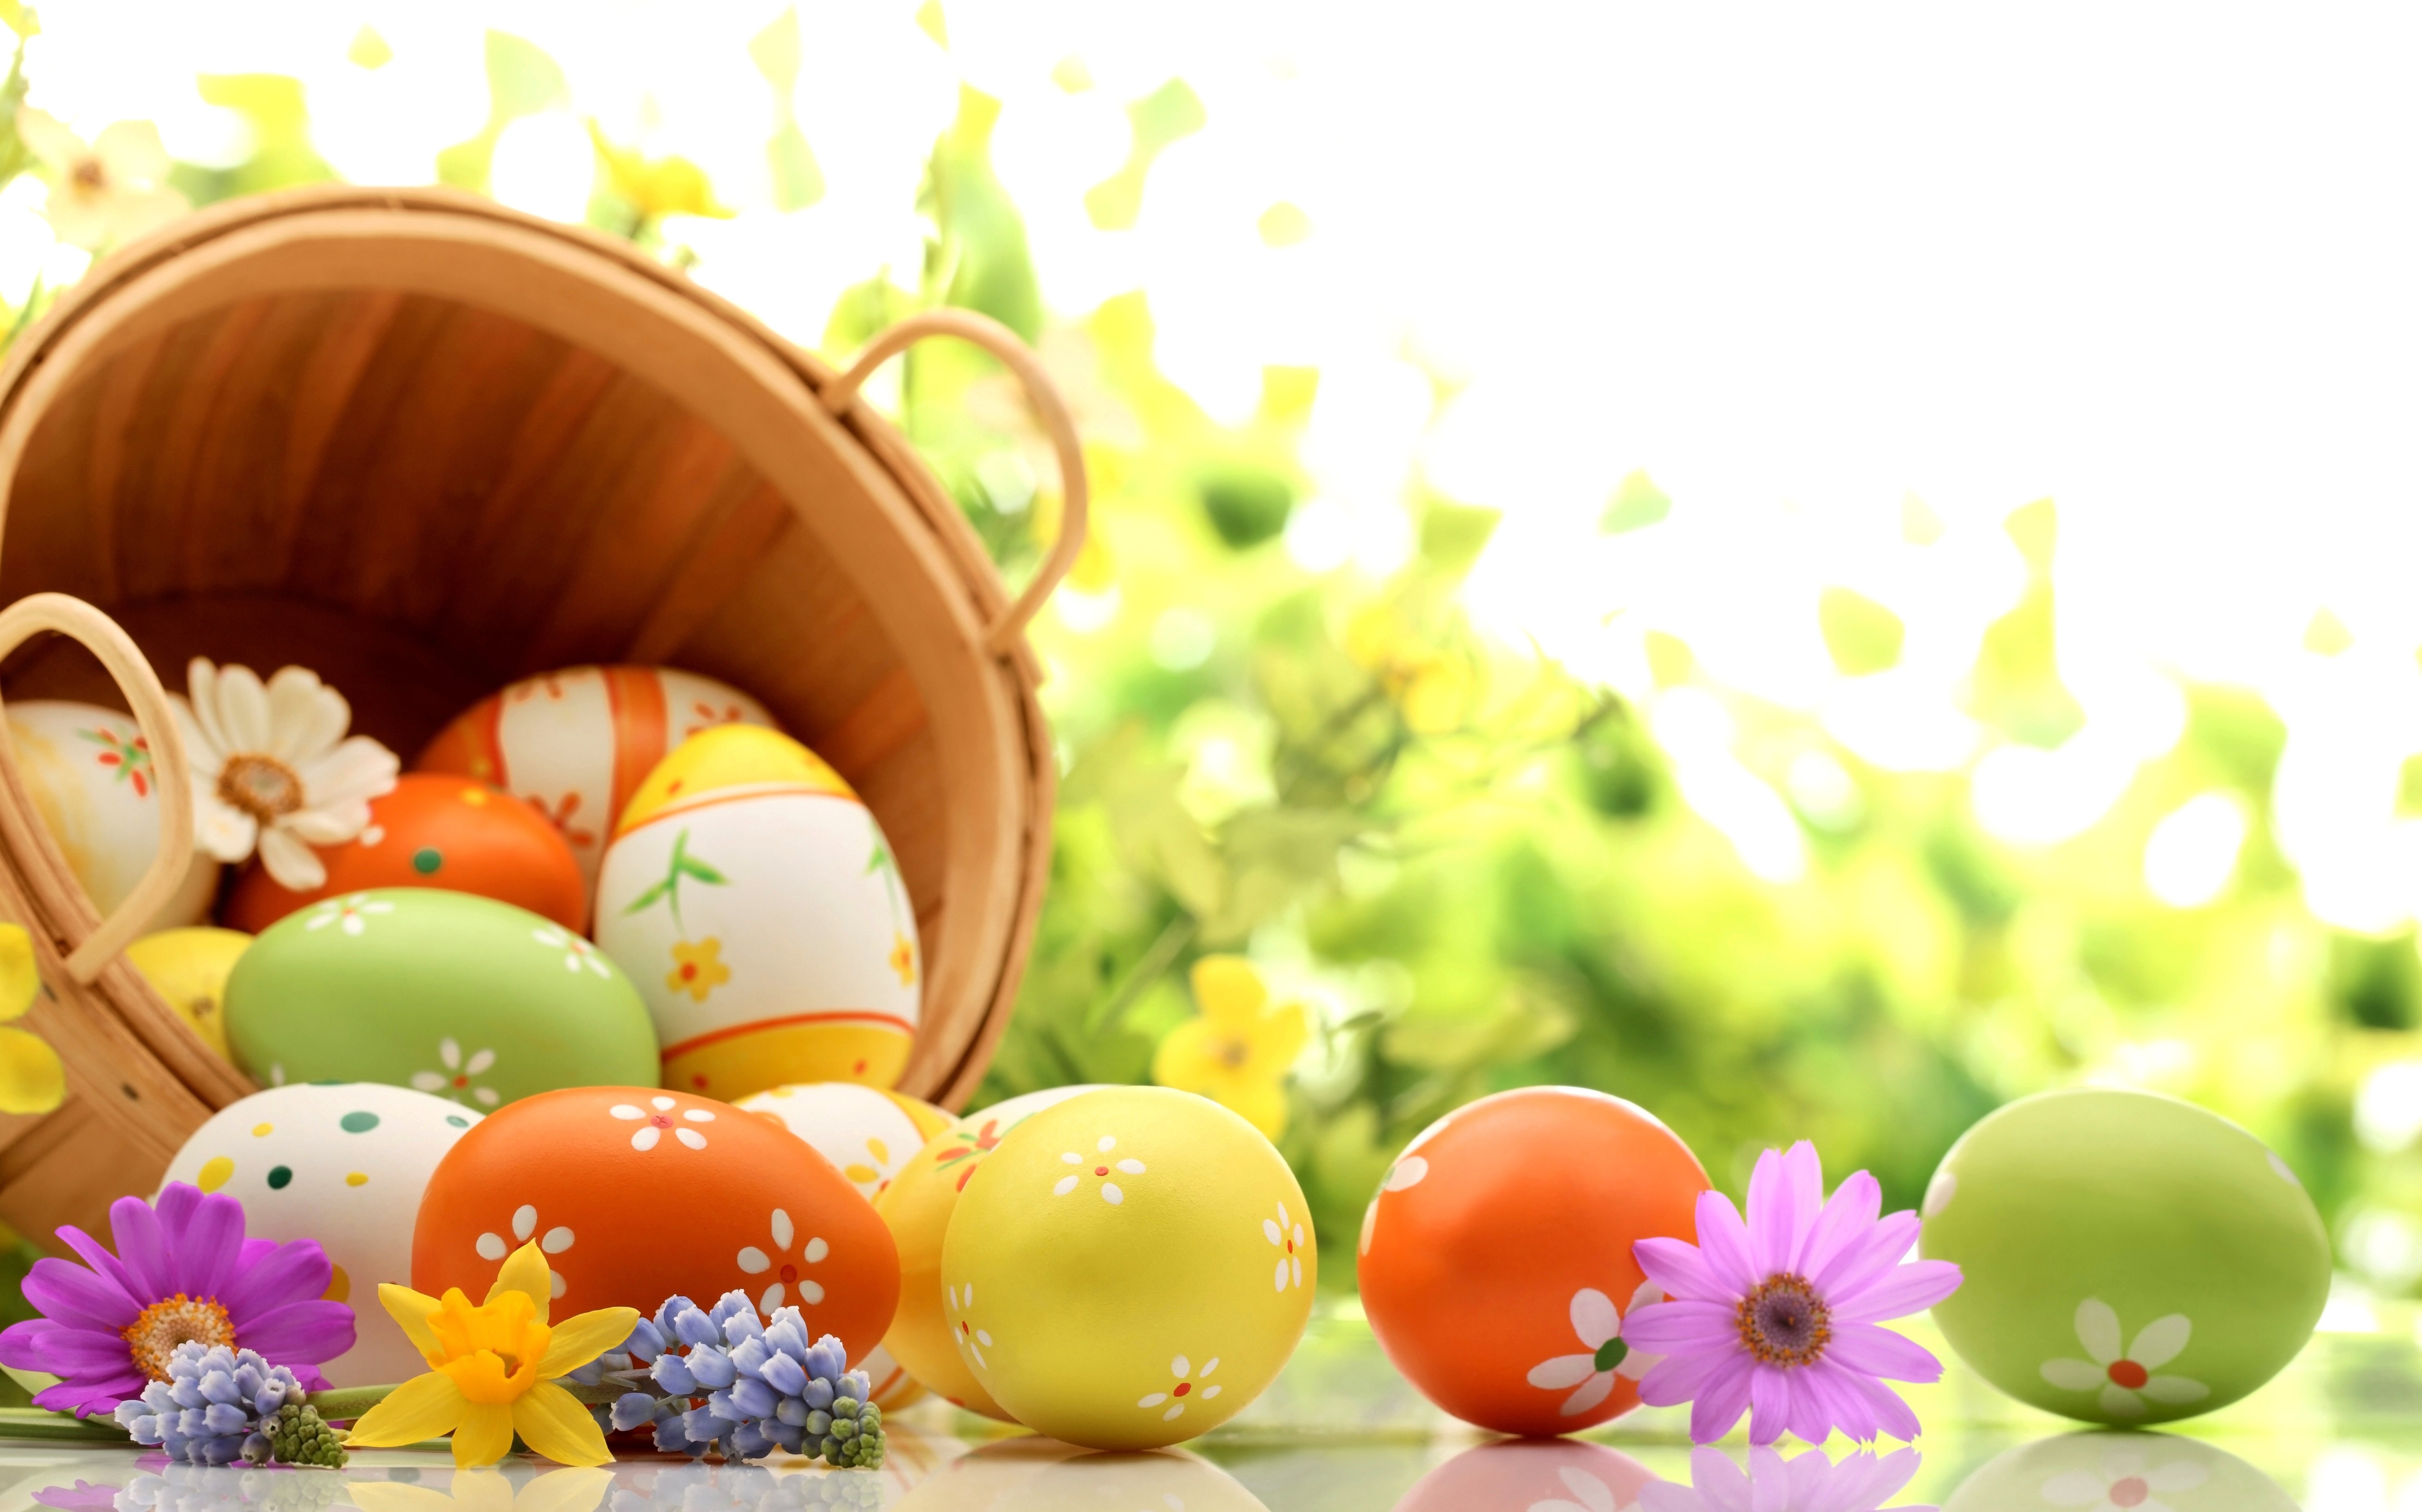 Easter Egg Background Image Amp Pictures Becuo